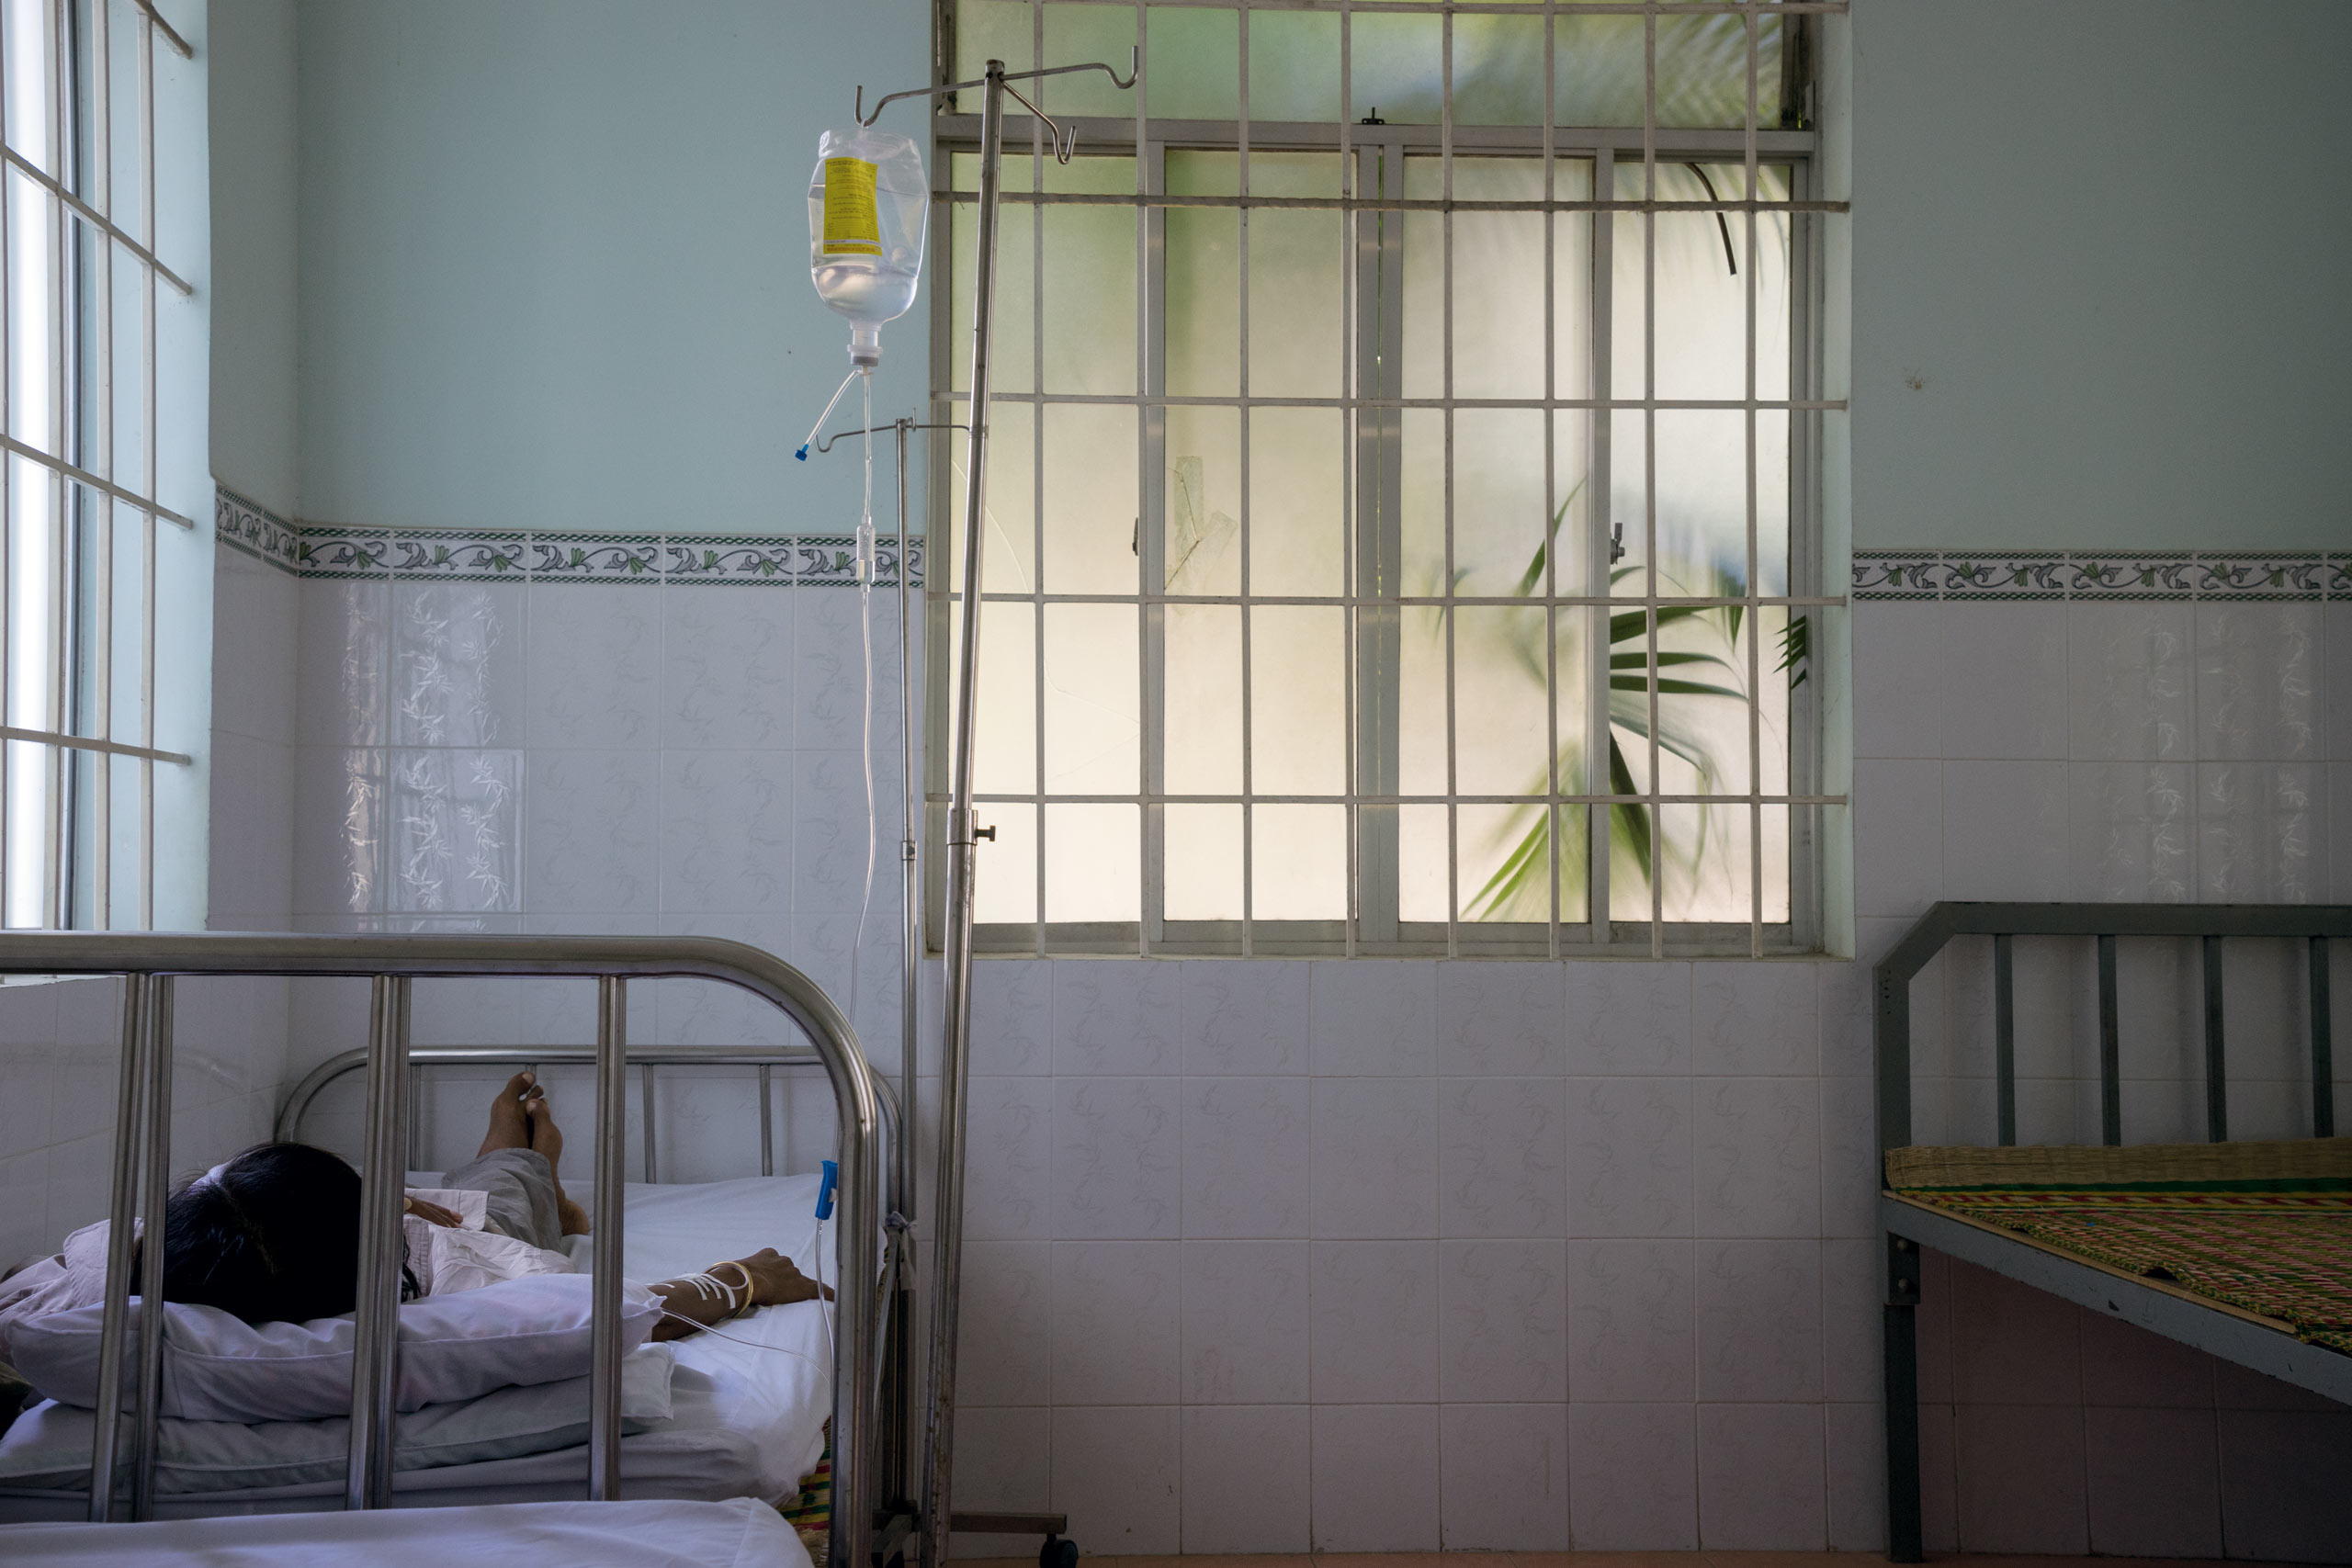 A patient receives an intravenous solution at a commune health center in Khanh Hoa Province, in Vietnam. Atlantic has constructed, rebuilt and provided medical equipment and supplies to over 50 Commune Health Centers in Khanh Hoa province alone.